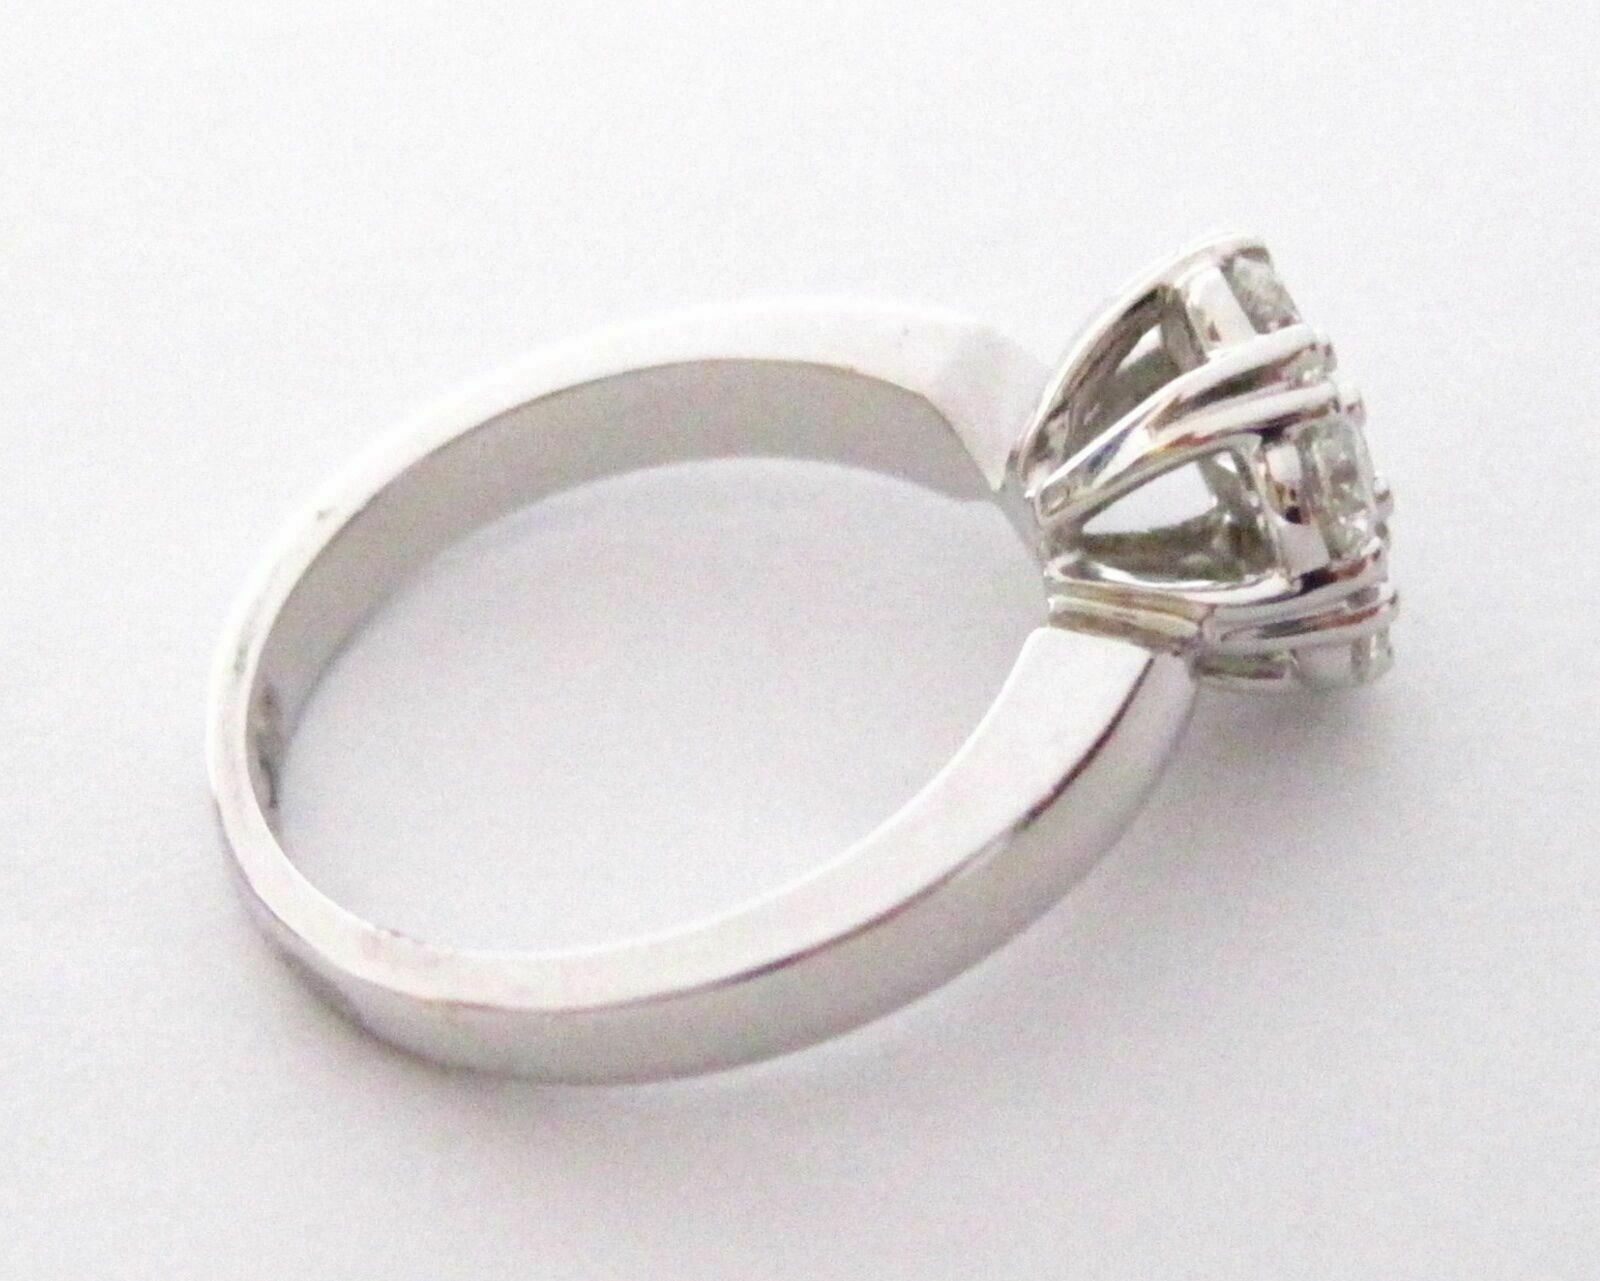 1.05 TCW Round Cut Cluster Diamond Cocktail Ring Size 5.5 F VS2 18k White Gold